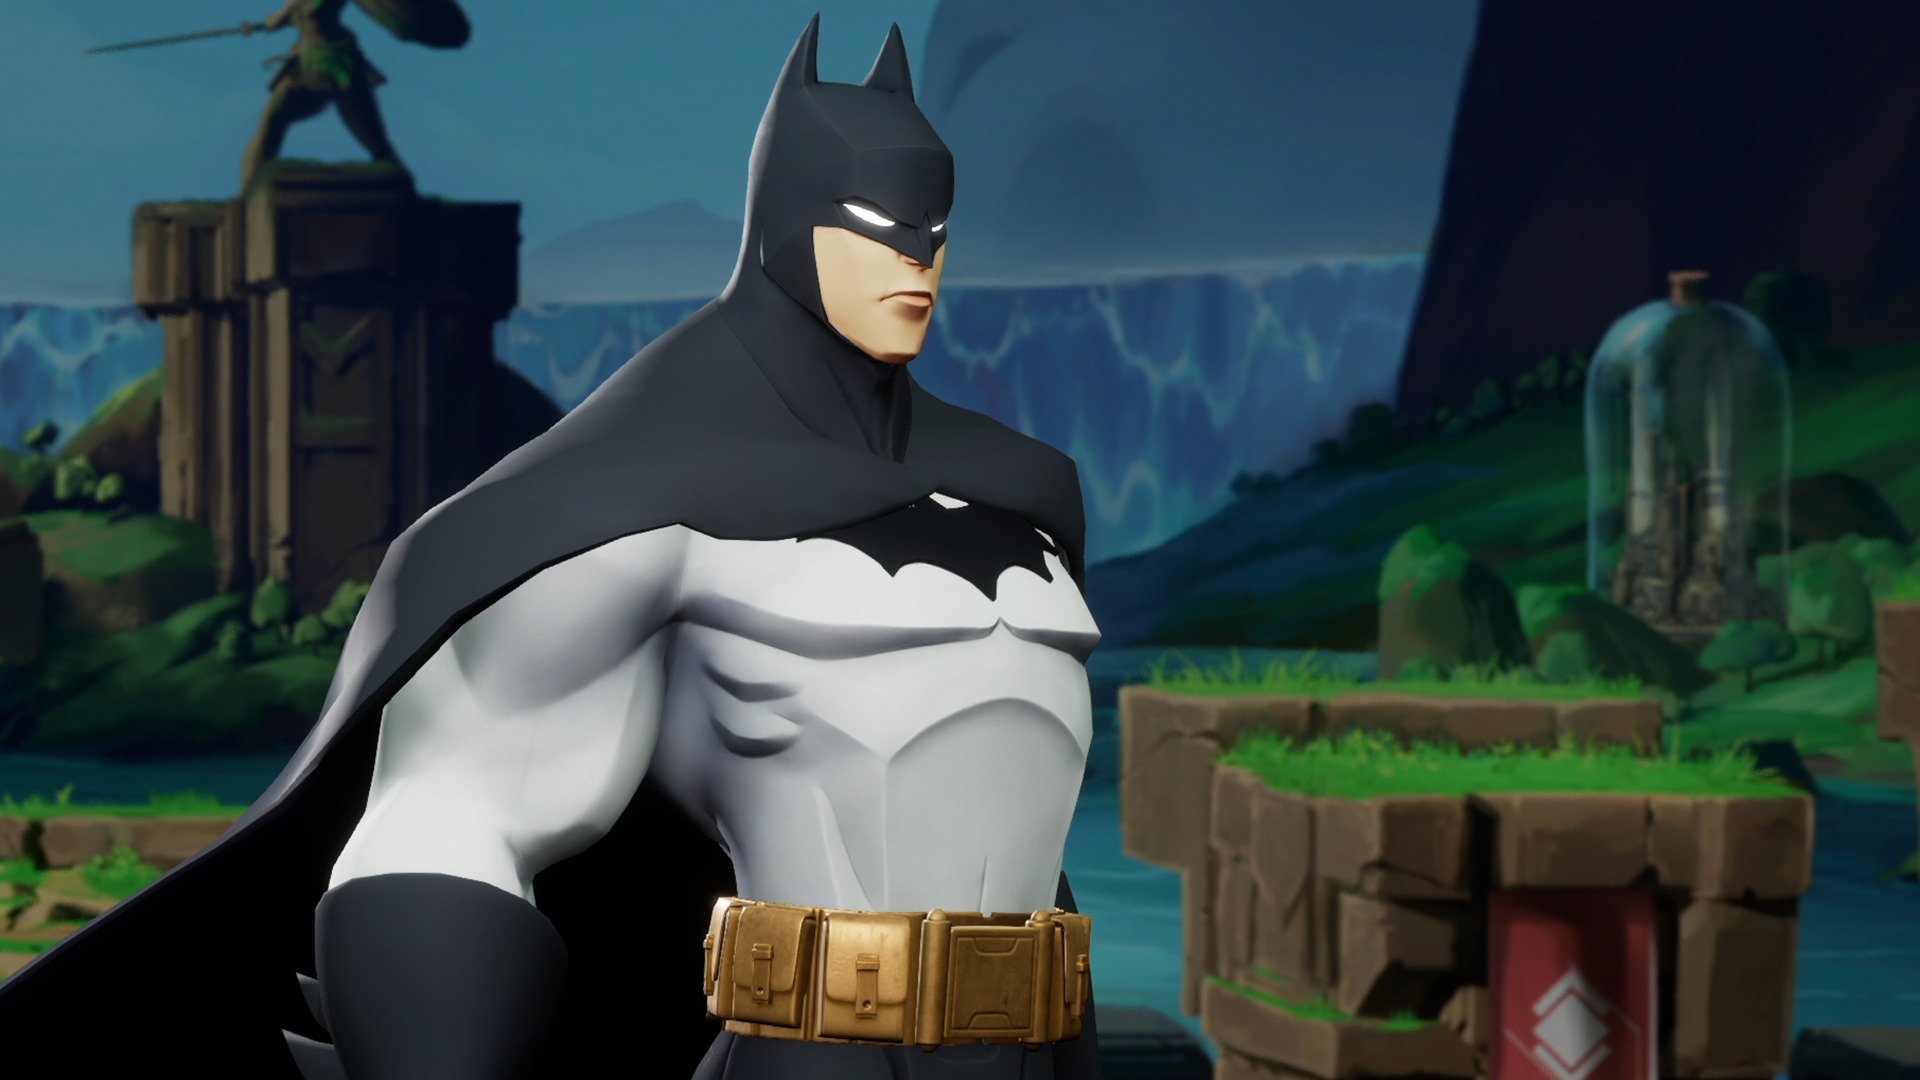 MultiVersus Batman Guide: Moves and strategies | VGC